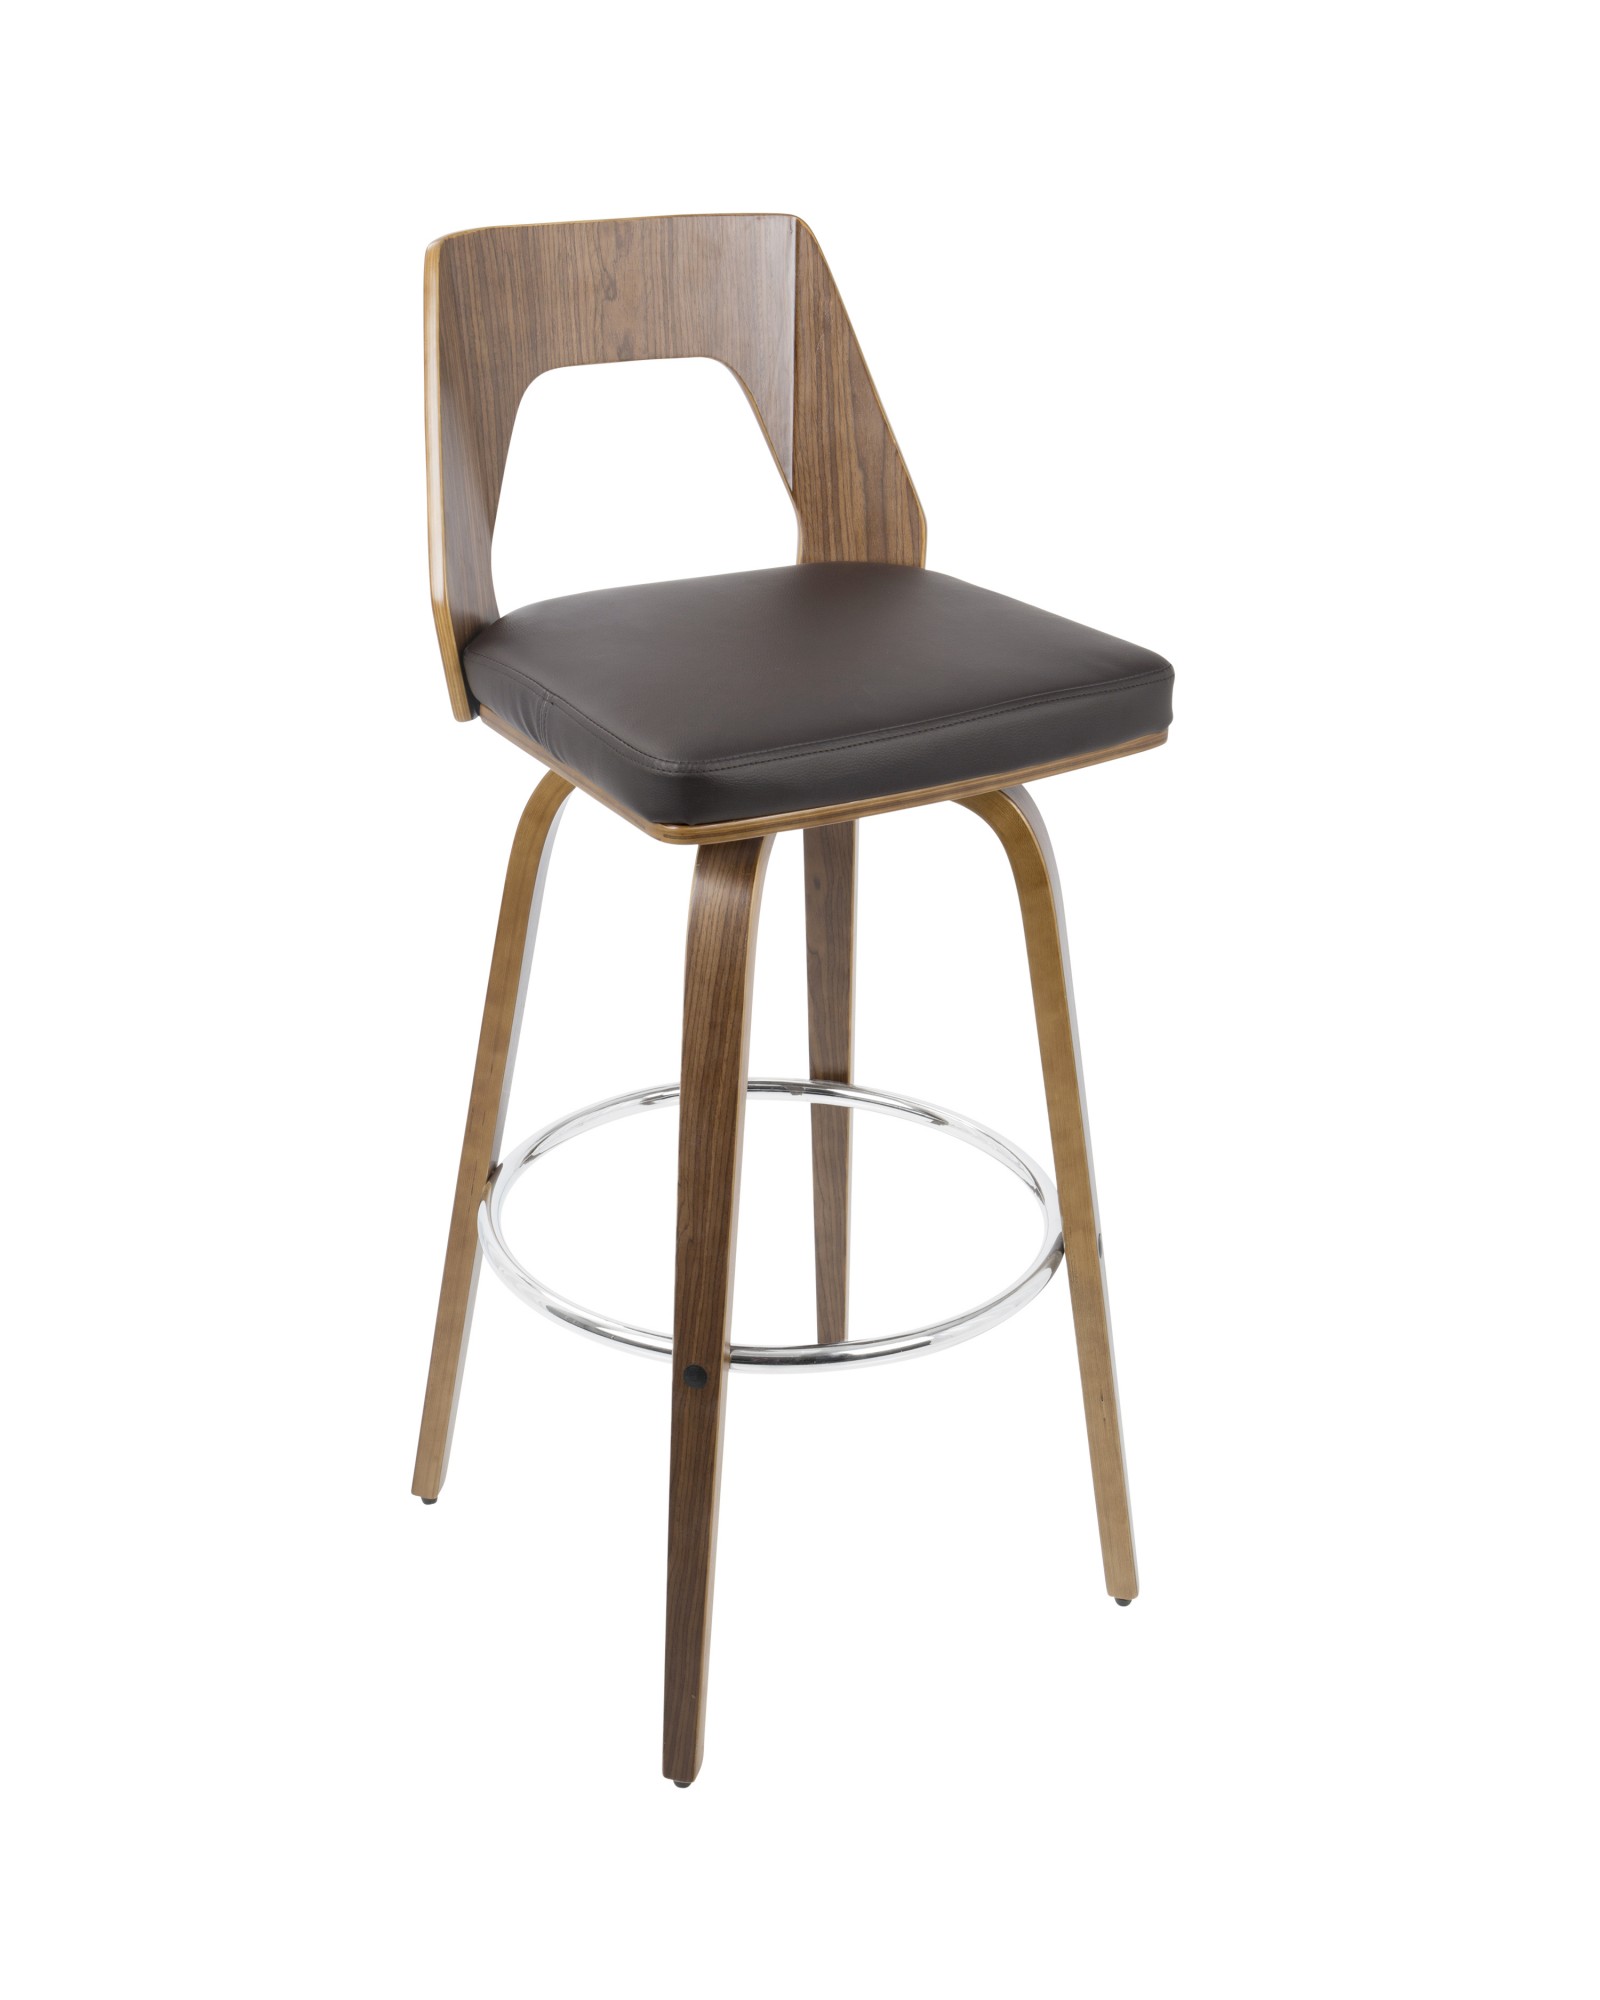 Trilogy Mid-Century Modern Barstool In Walnut And Brown Faux Leather